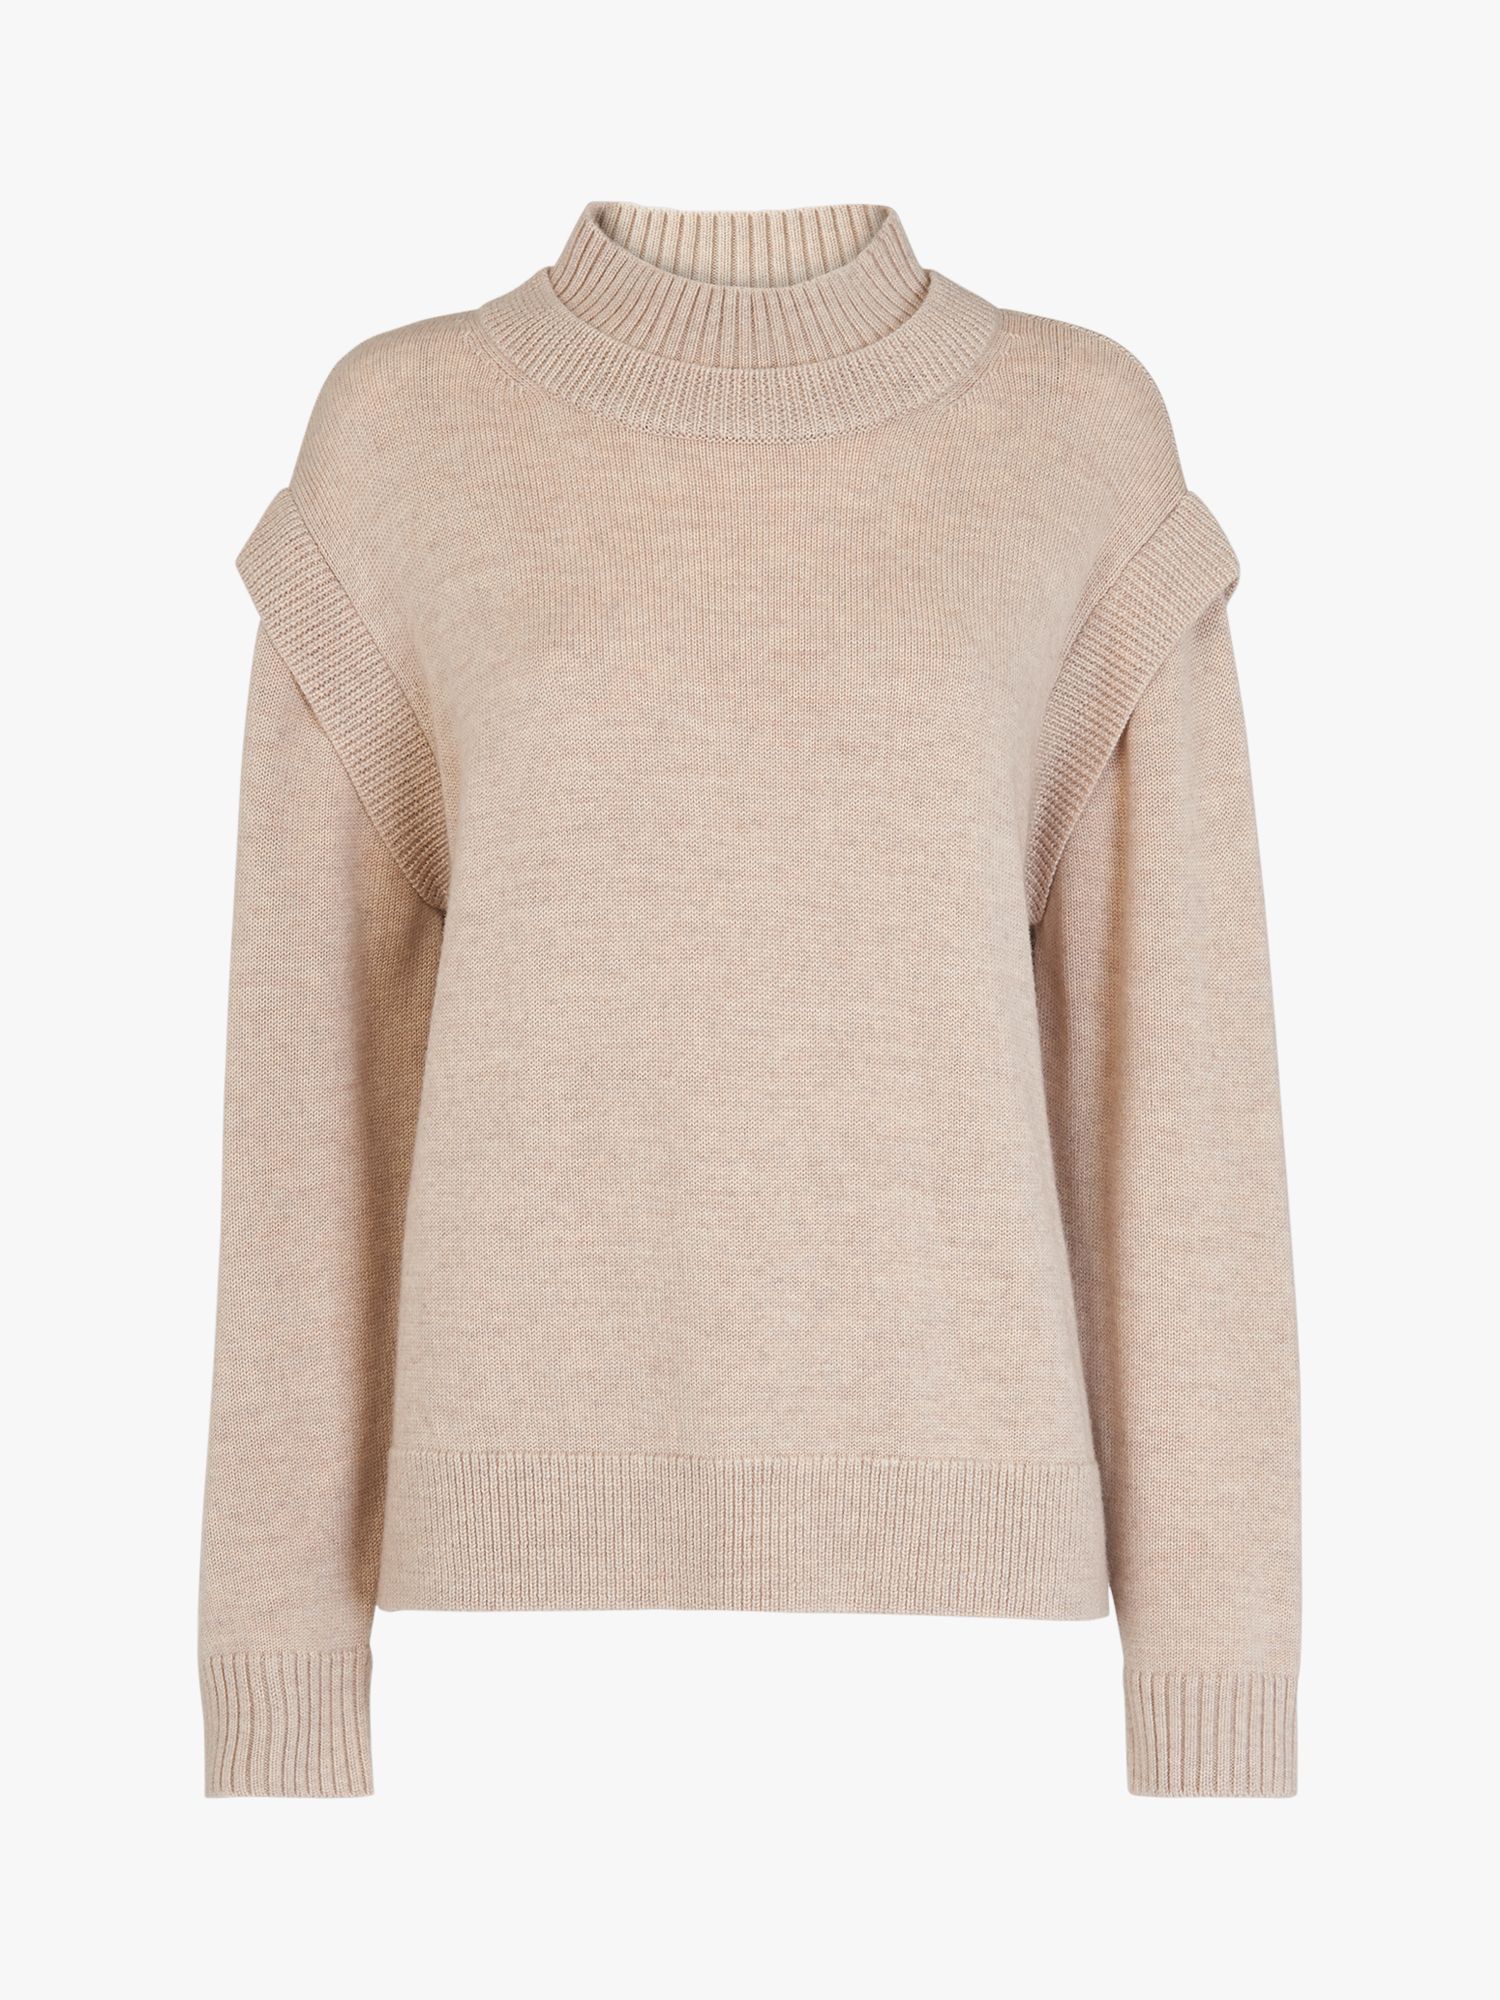 Whistles Double Layer Merino Wool Jumper, Oatmeal at John Lewis & Partners